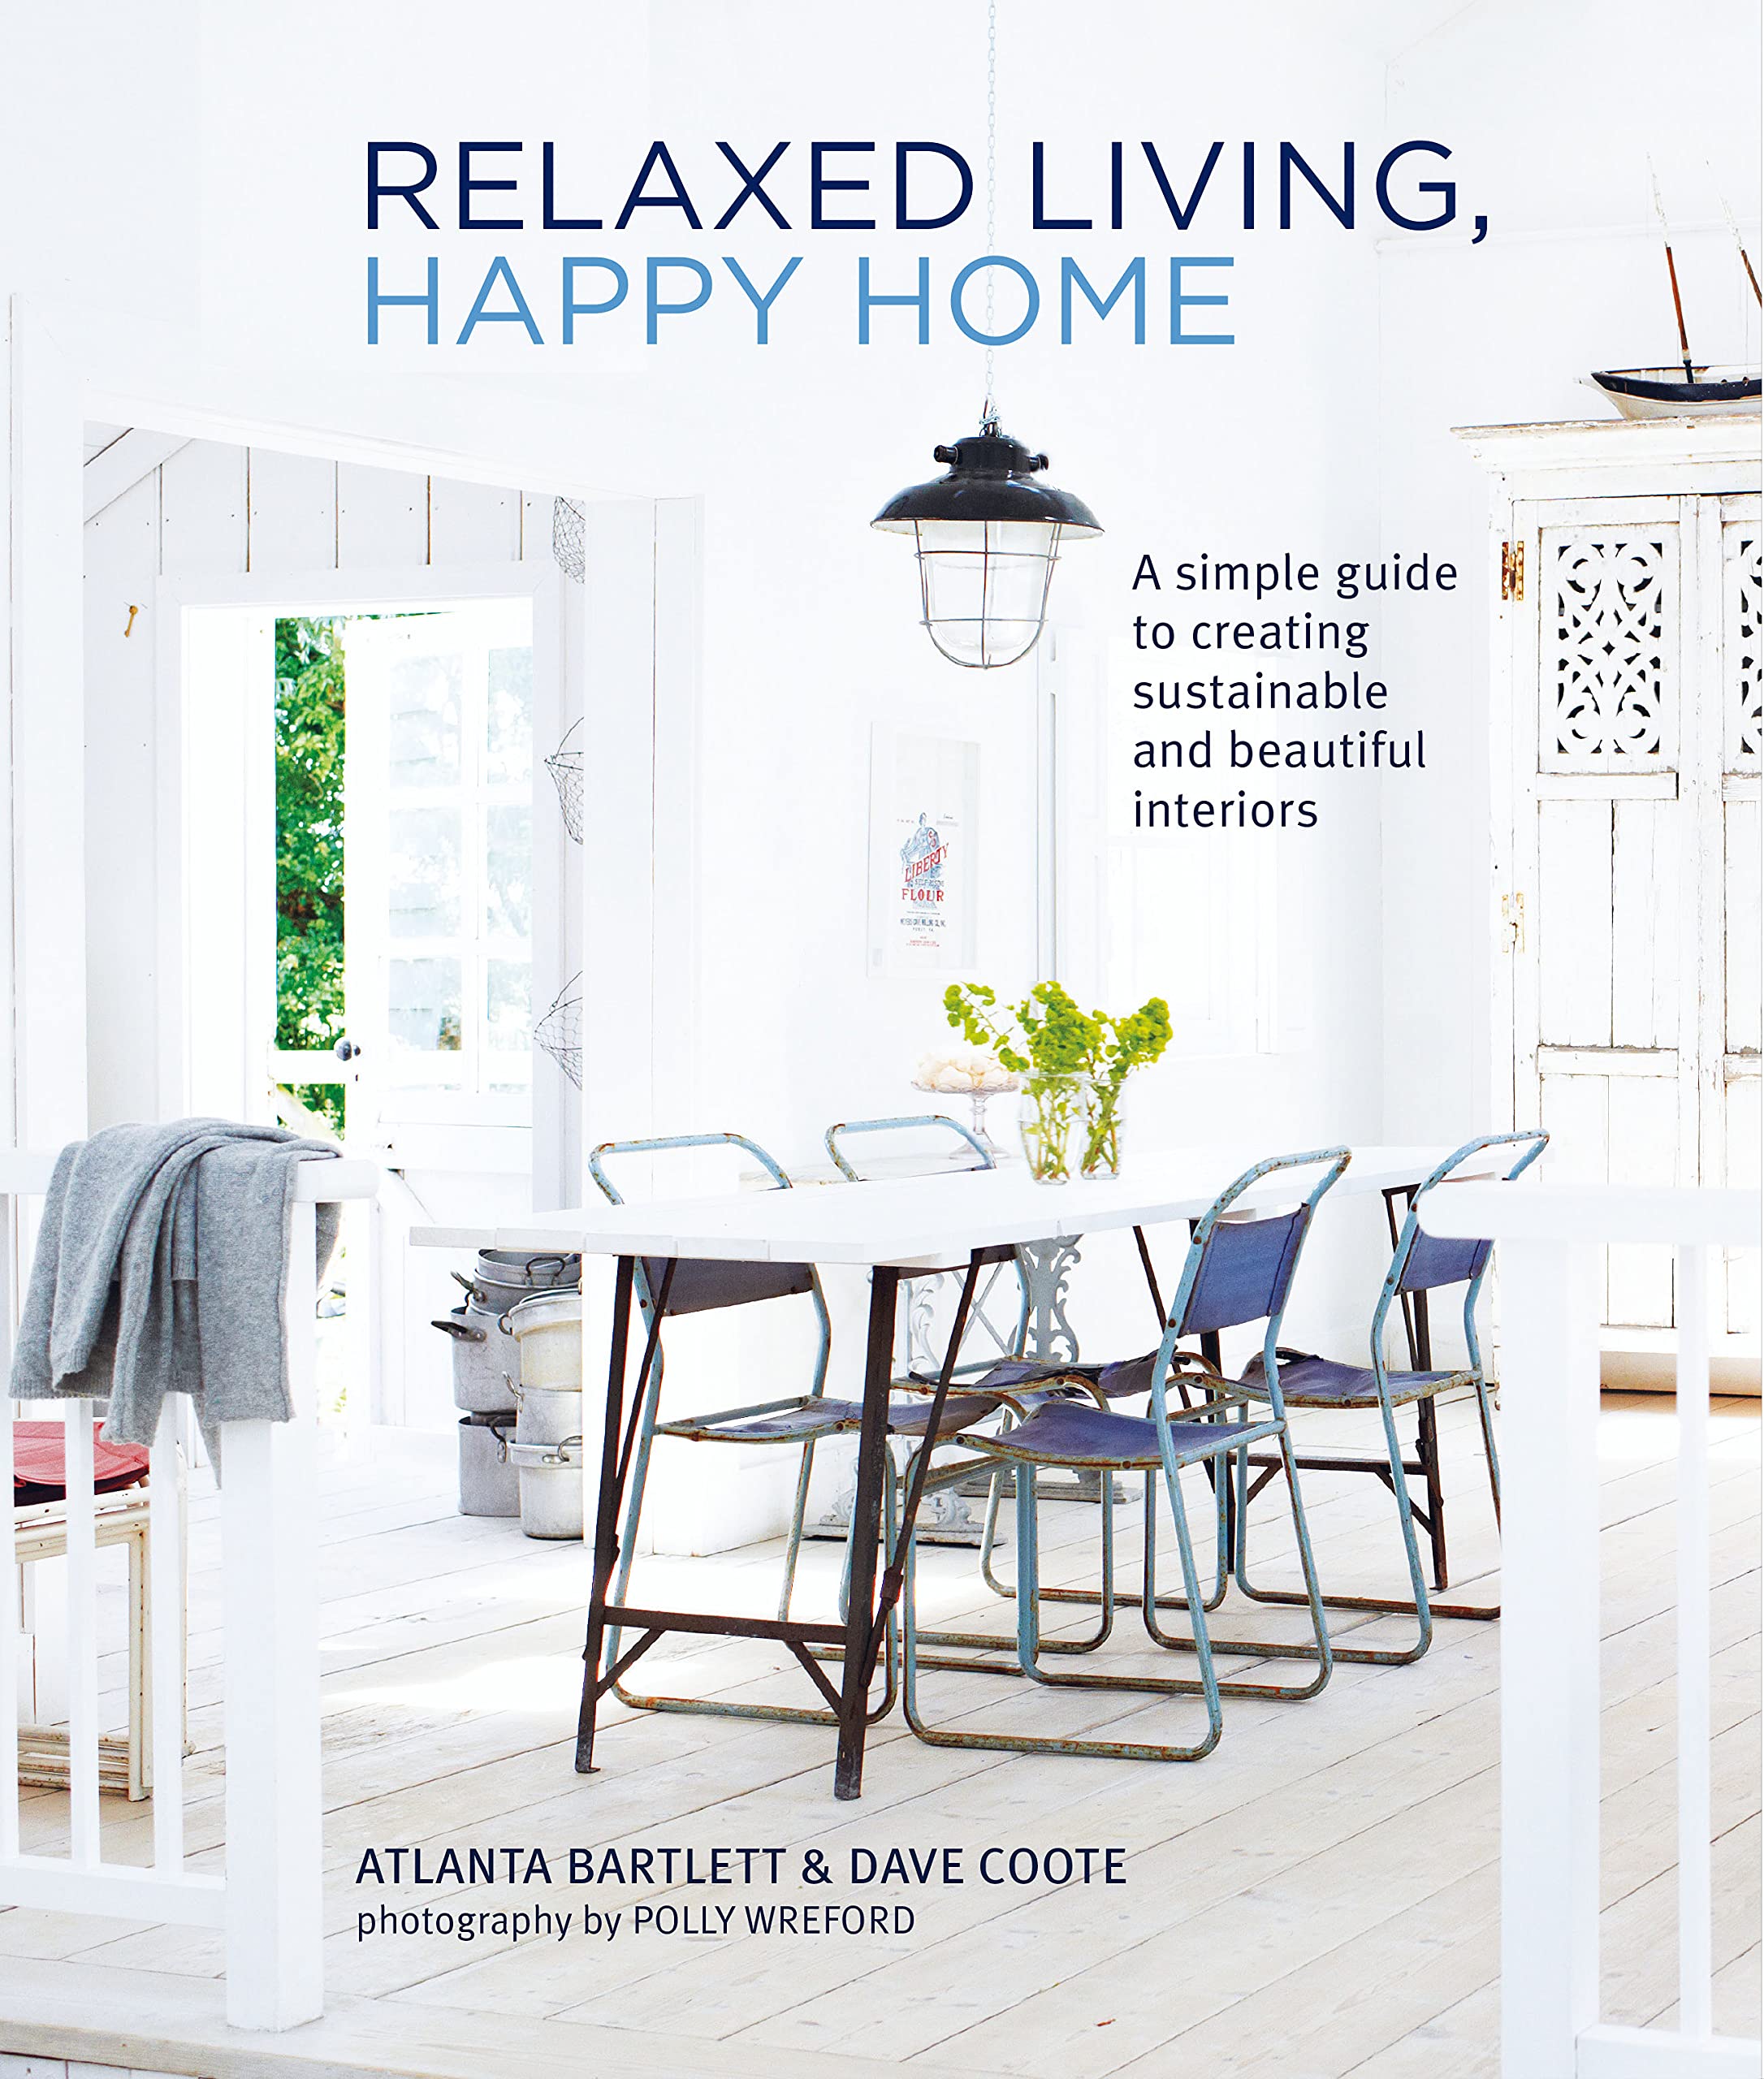 Relaxed Living, Happy Home: A simple guide to creating sustainable and beautiful